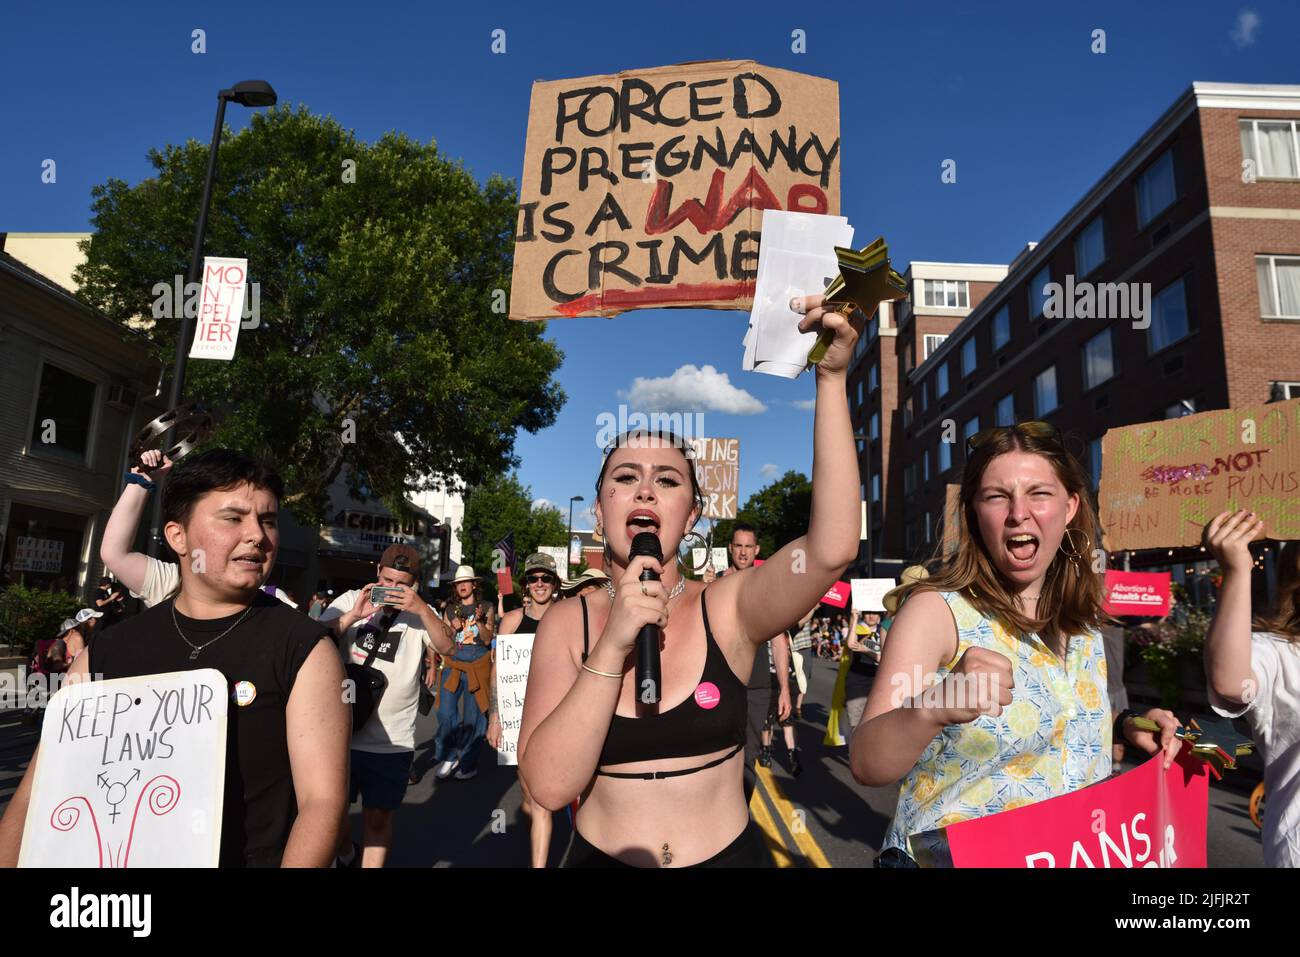 Women marchers protest the US Supreme Court ruling overturning Roe V. Wade in a July 4th parade, Montpelier, Vermont, USA (held July 3). Stock Photo